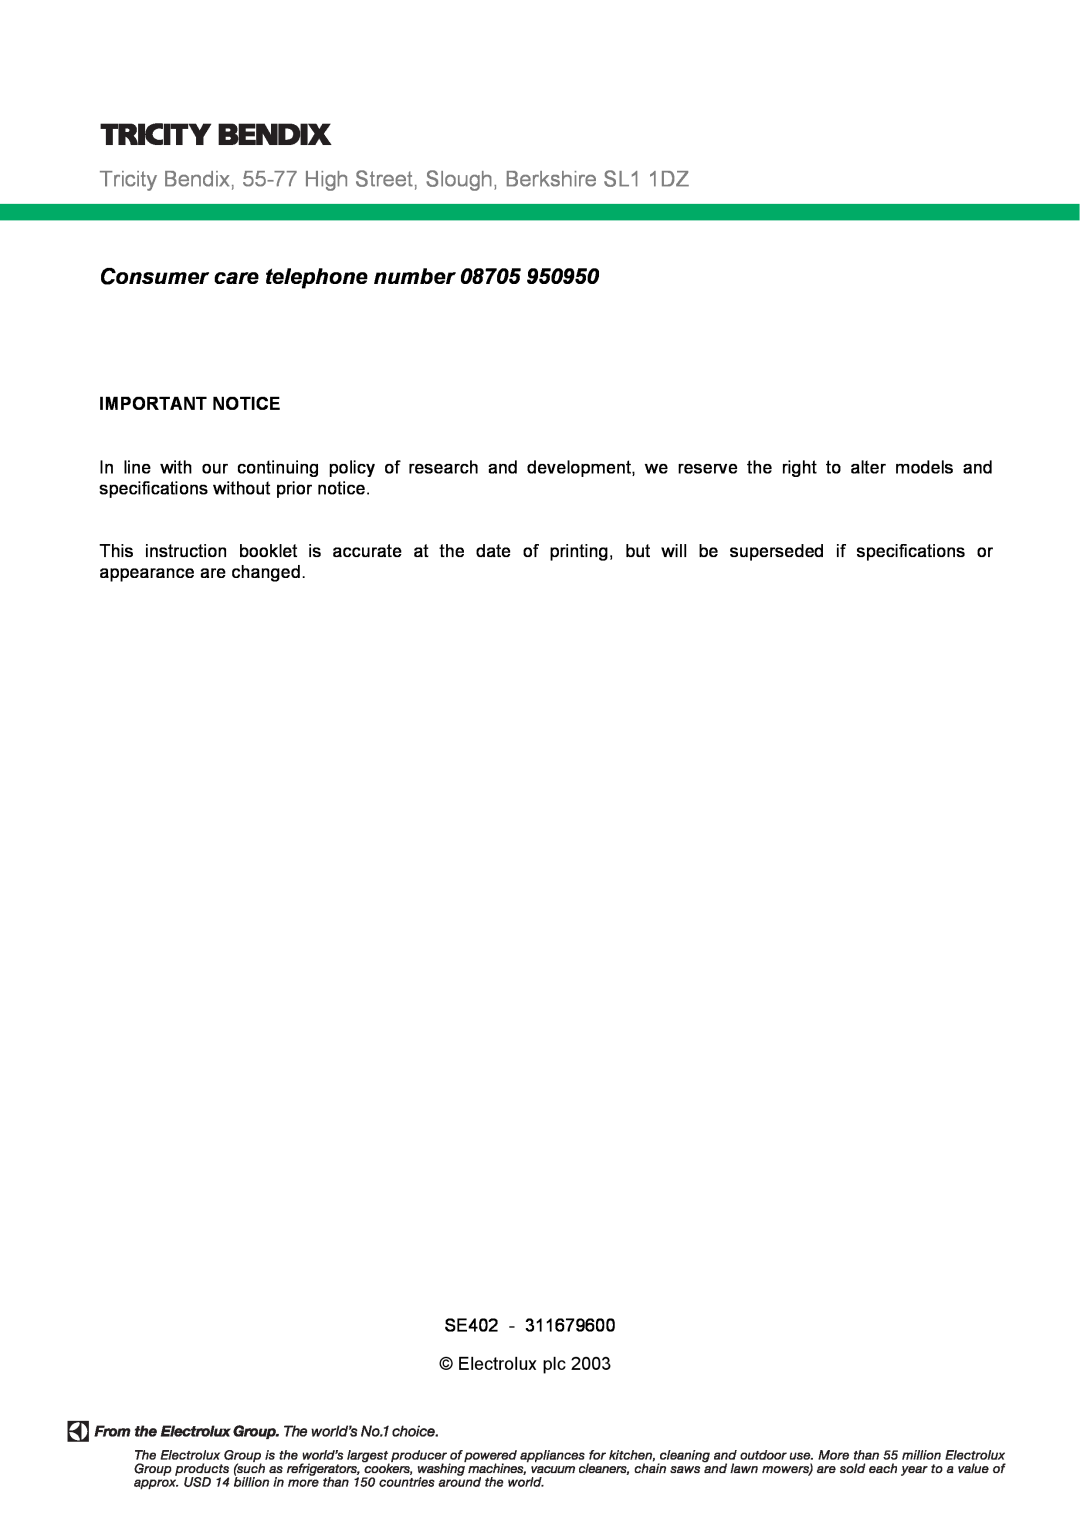 Tricity Bendix SE402 installation instructions Consumer care telephone number, Important Notice 